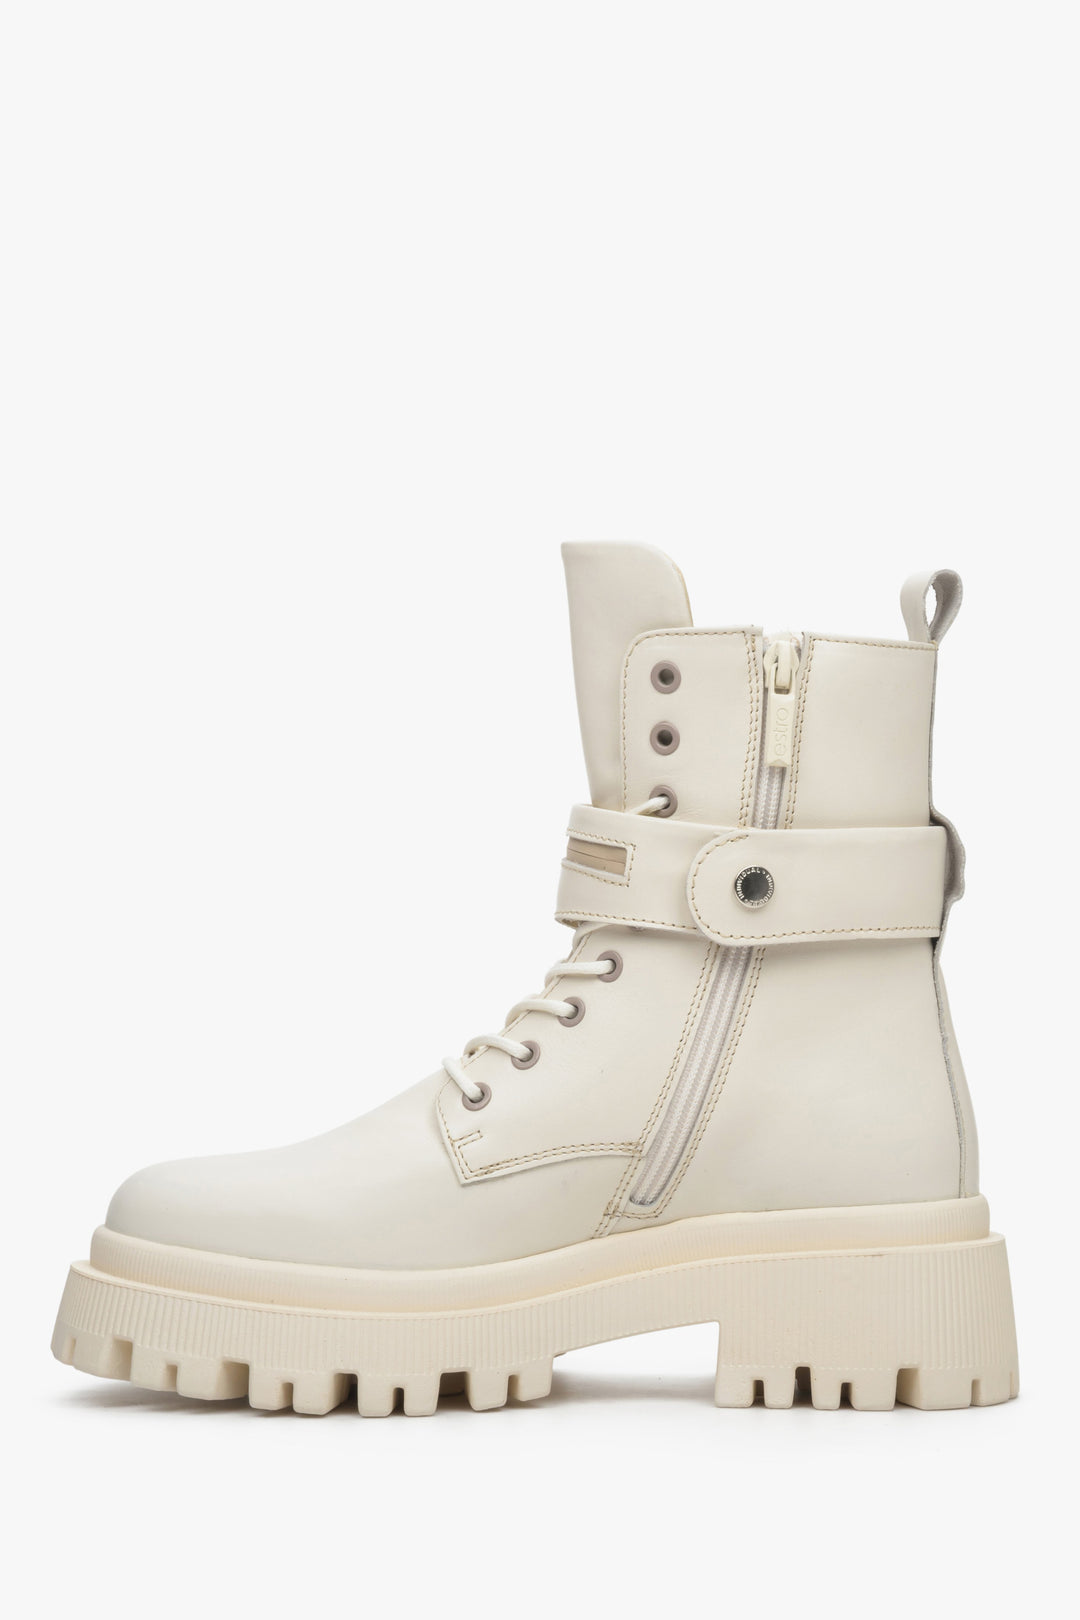 High, light beige women's winter ankle boots on a platform by Estro - close-up of the shoe profile.